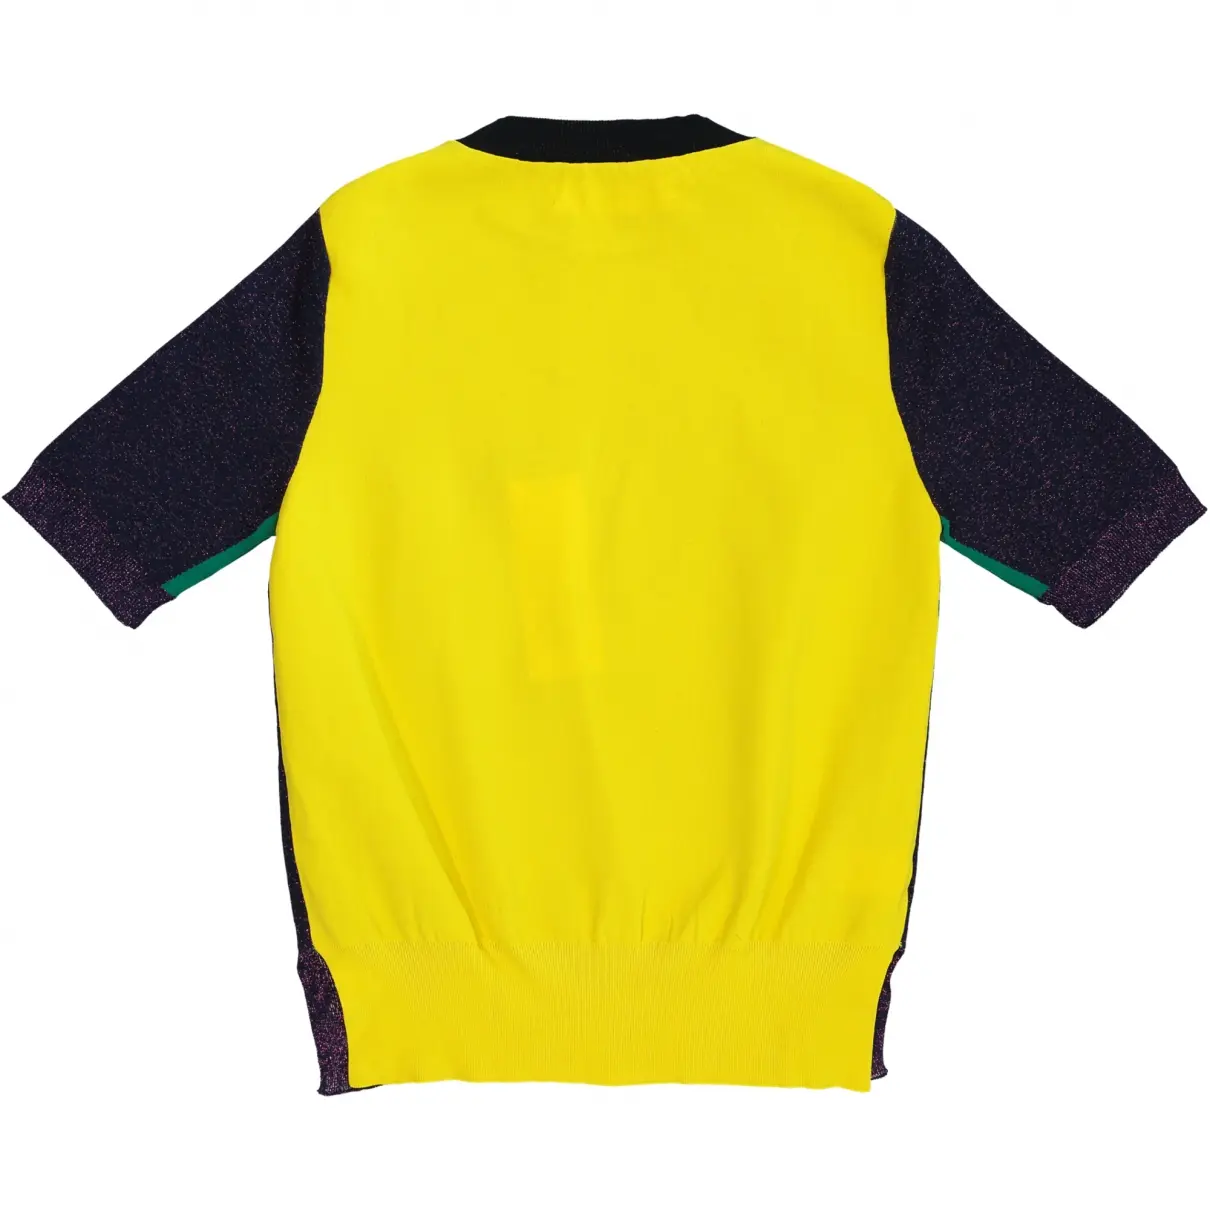 Marni Jersey top for sale